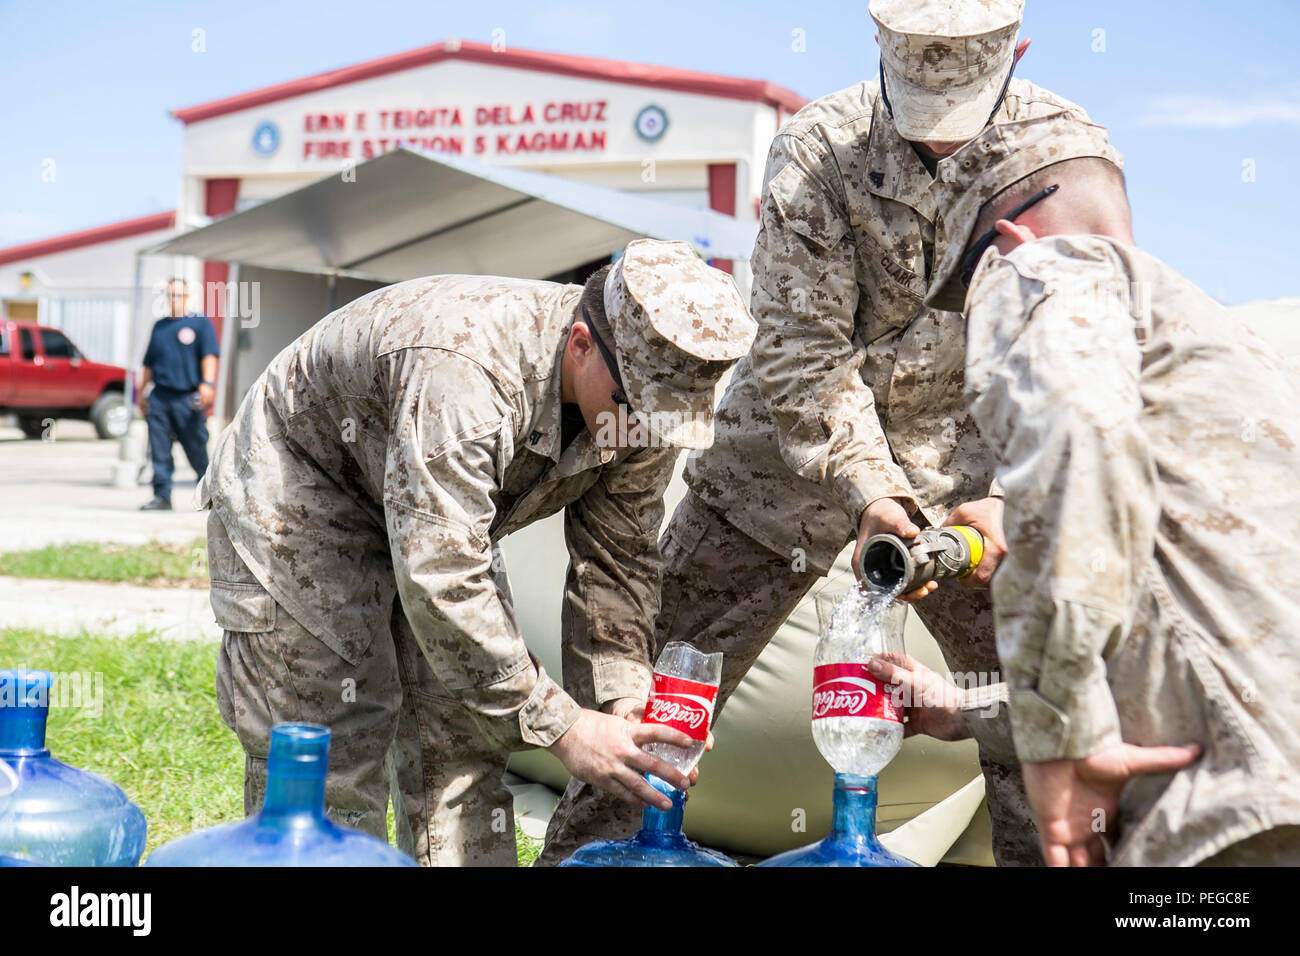 U.S. Marines with Combat Logistics Battalion 31, 31st Marine Expeditionary Unit, distribute water to  local civilians during typhoon relief efforts in Saipan, Aug. 11, 2015. The 31st MEU and the ships of the Bonhomme Richard Amphibious Ready Group are assisting the Federal Emergency Management Agency with distributing emergency relief supplies to Saipan after the island was struck by Typhoon Soudelor, Aug. 2-3. (U.S. Marine Corps photo by Lance Cpl. Brian Bekkala/Released.) Stock Photo